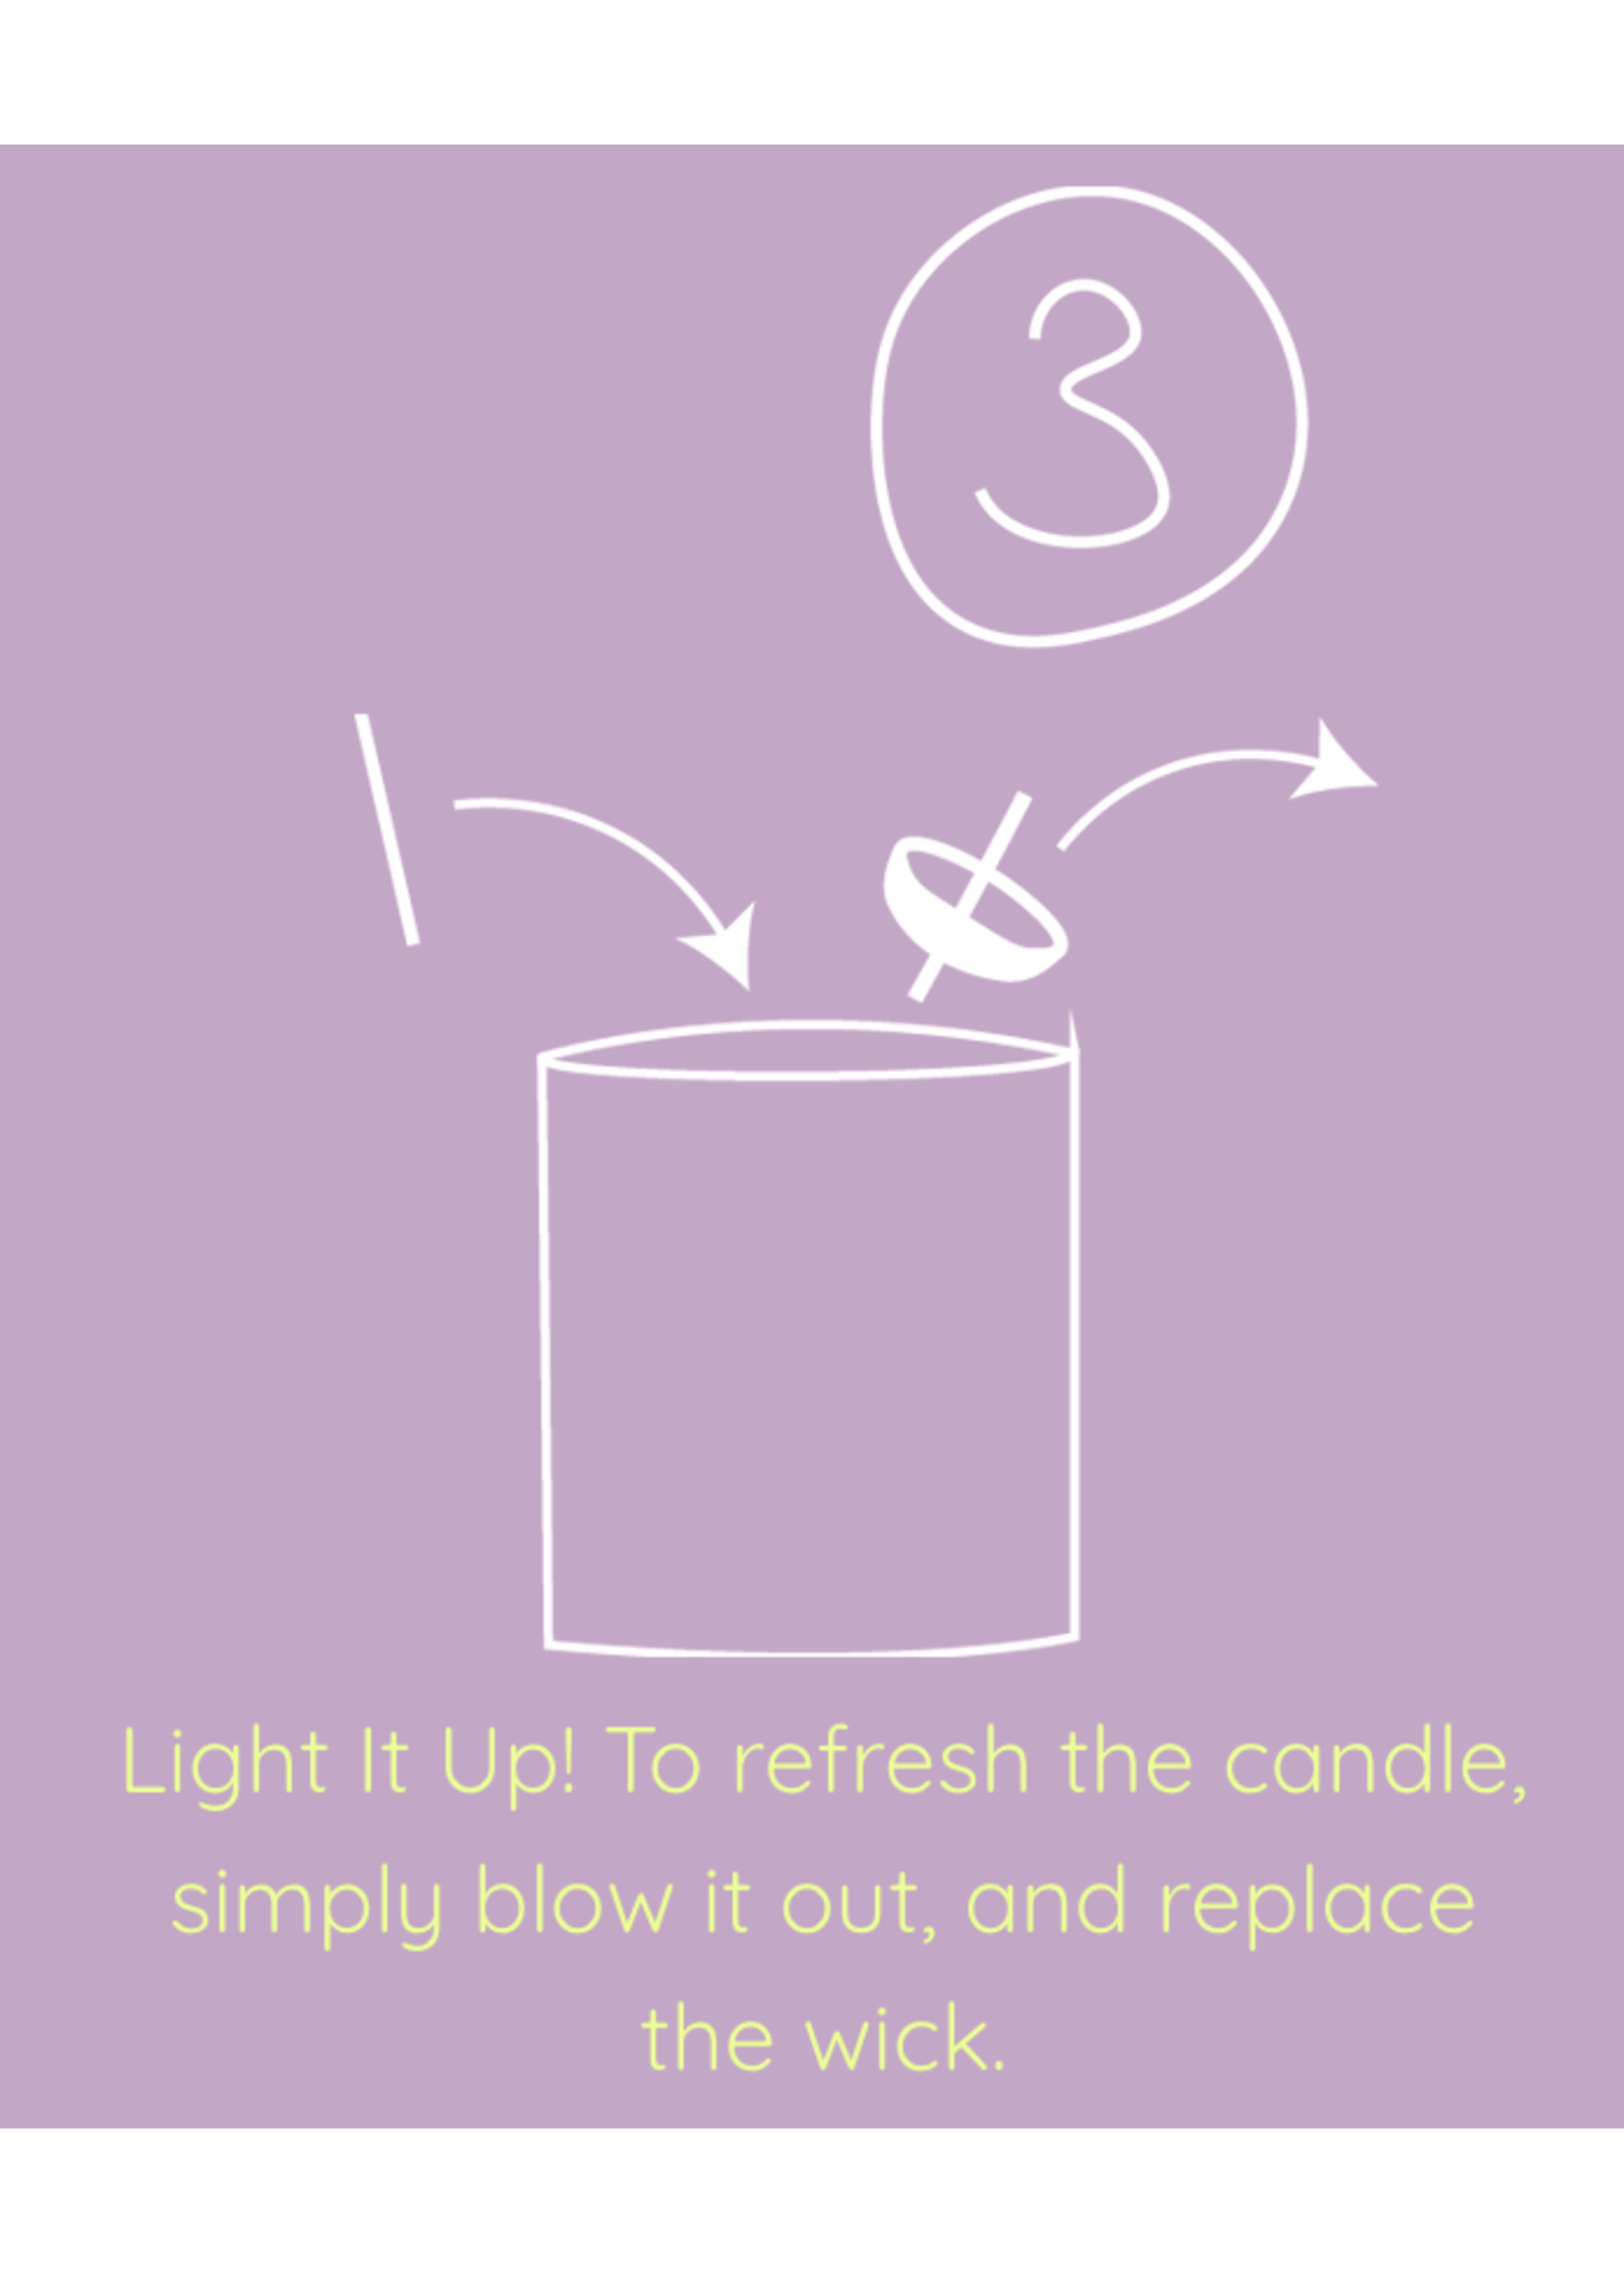 Bölkie a brand new candle every time you light up